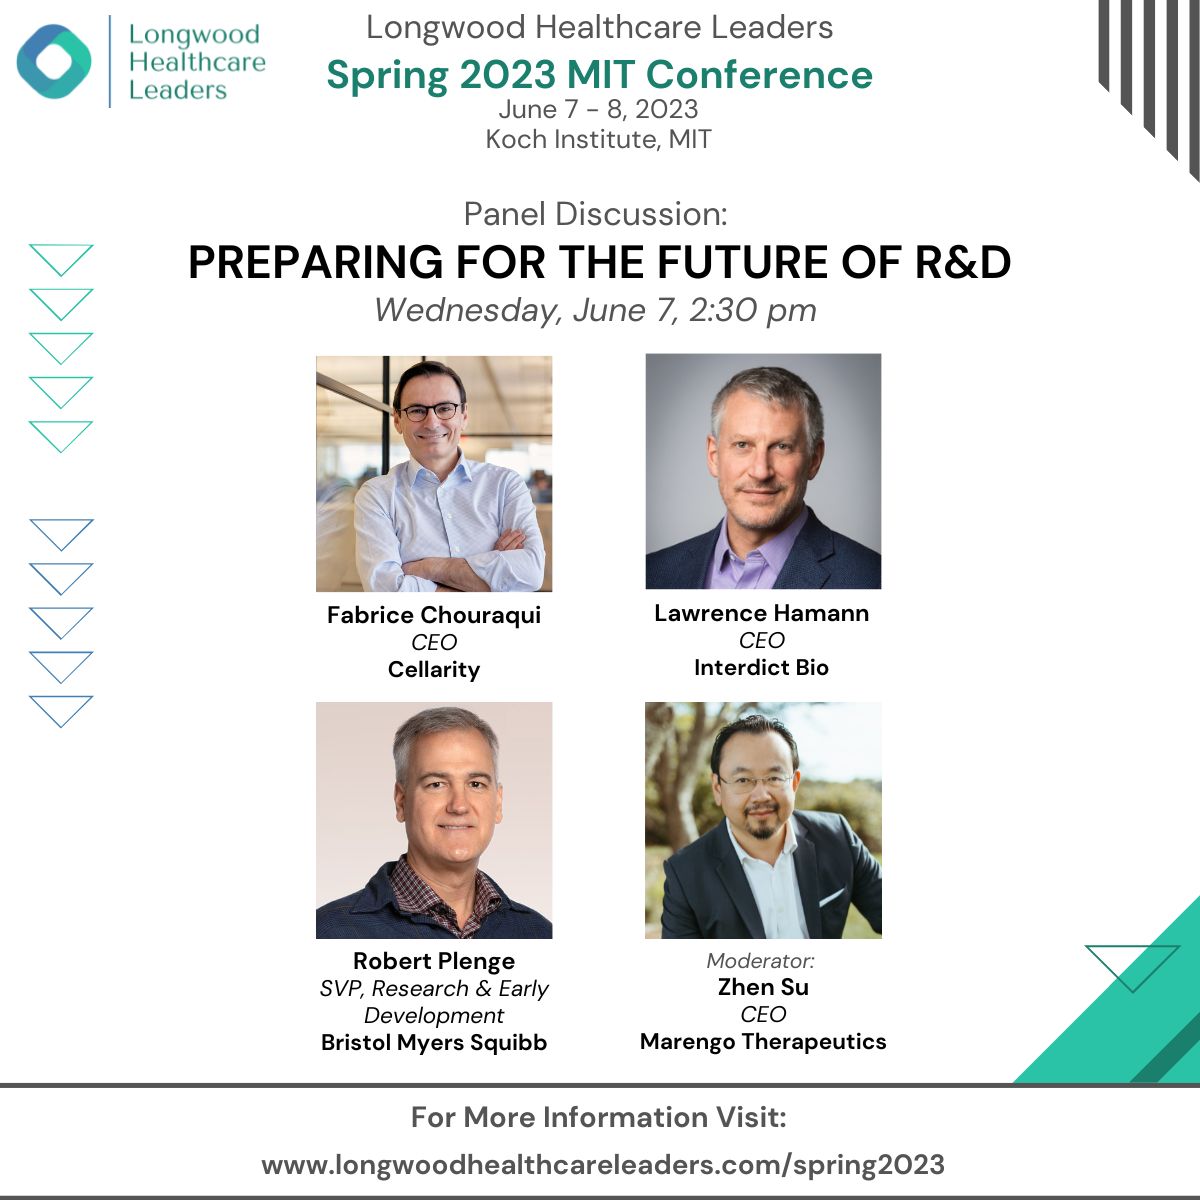 Our CEO Fabrice Chouraqui will be at #LongwoodHealthCareLeaders next week discussing Preparing for the Future of R&D along with execs from Interdict Bio, @Bristol_Myers & @MarengoTx. @LongwoodLeaders: longwoodhealthcareleaders.com/spring2023 #AI #drugdiscovery #singlecell #machinelearning